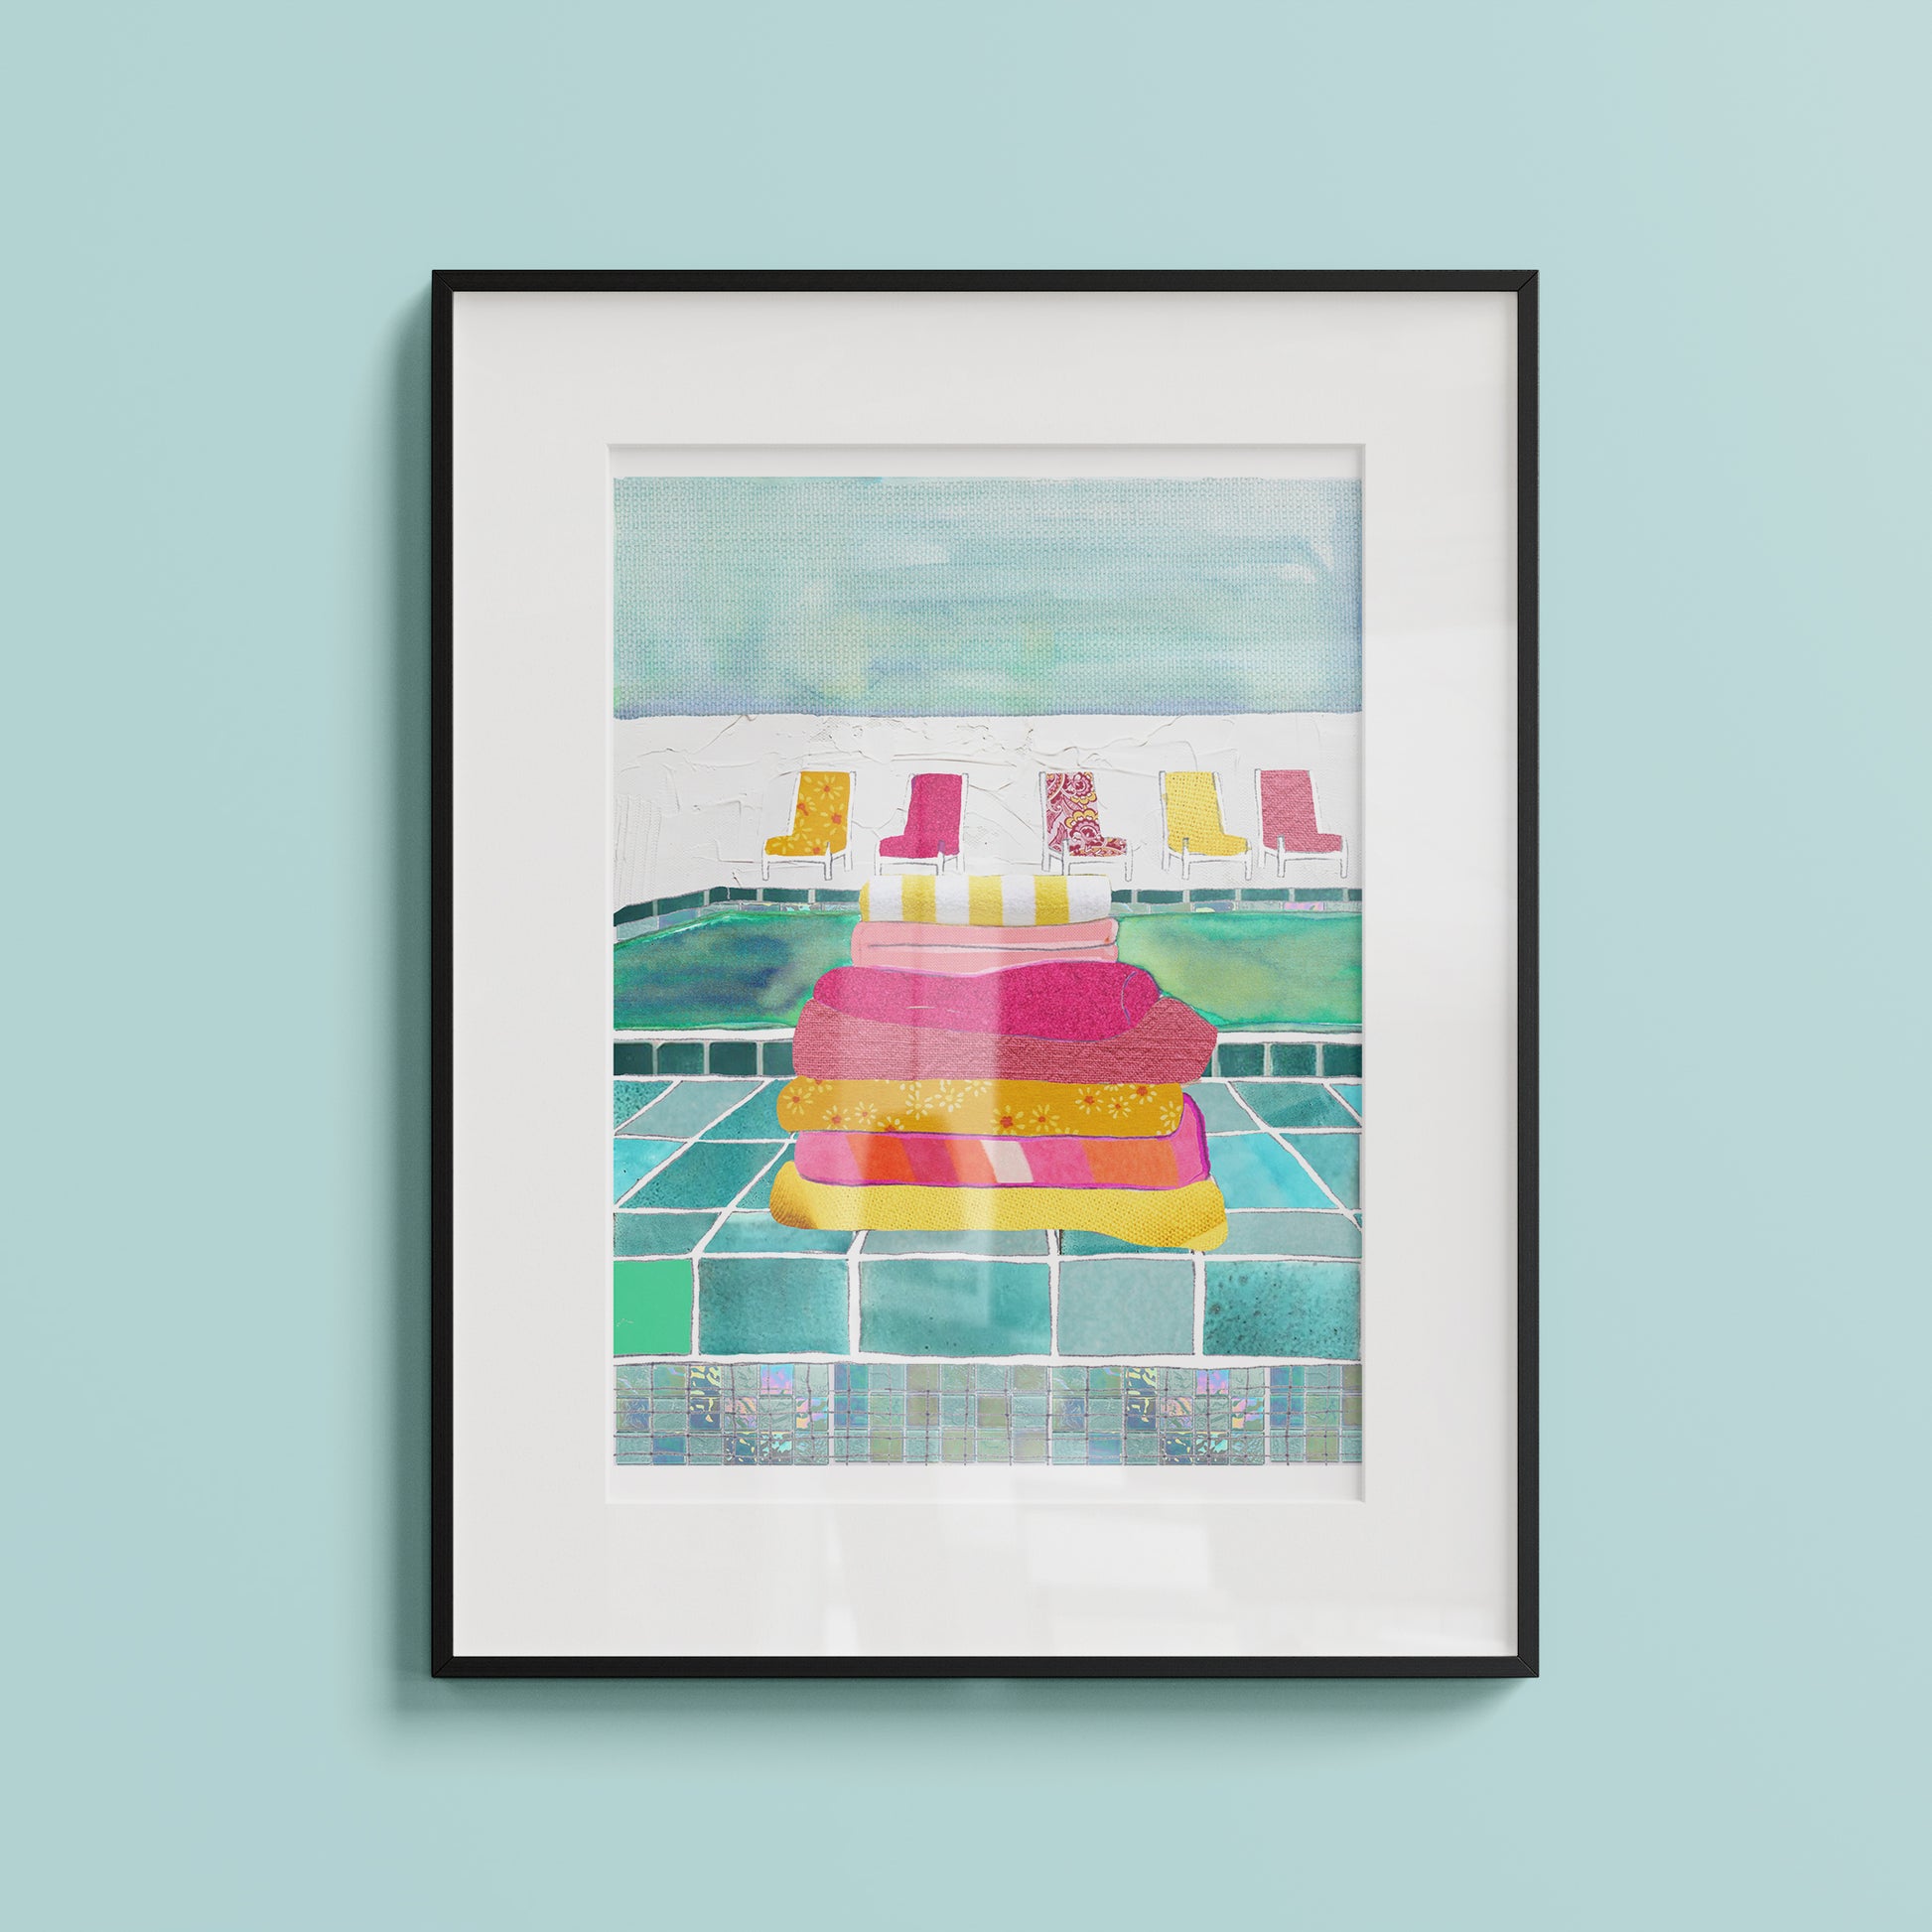 Framed illustration of a poolside featuring a stack of colourful towels and some chairs on a blue background.